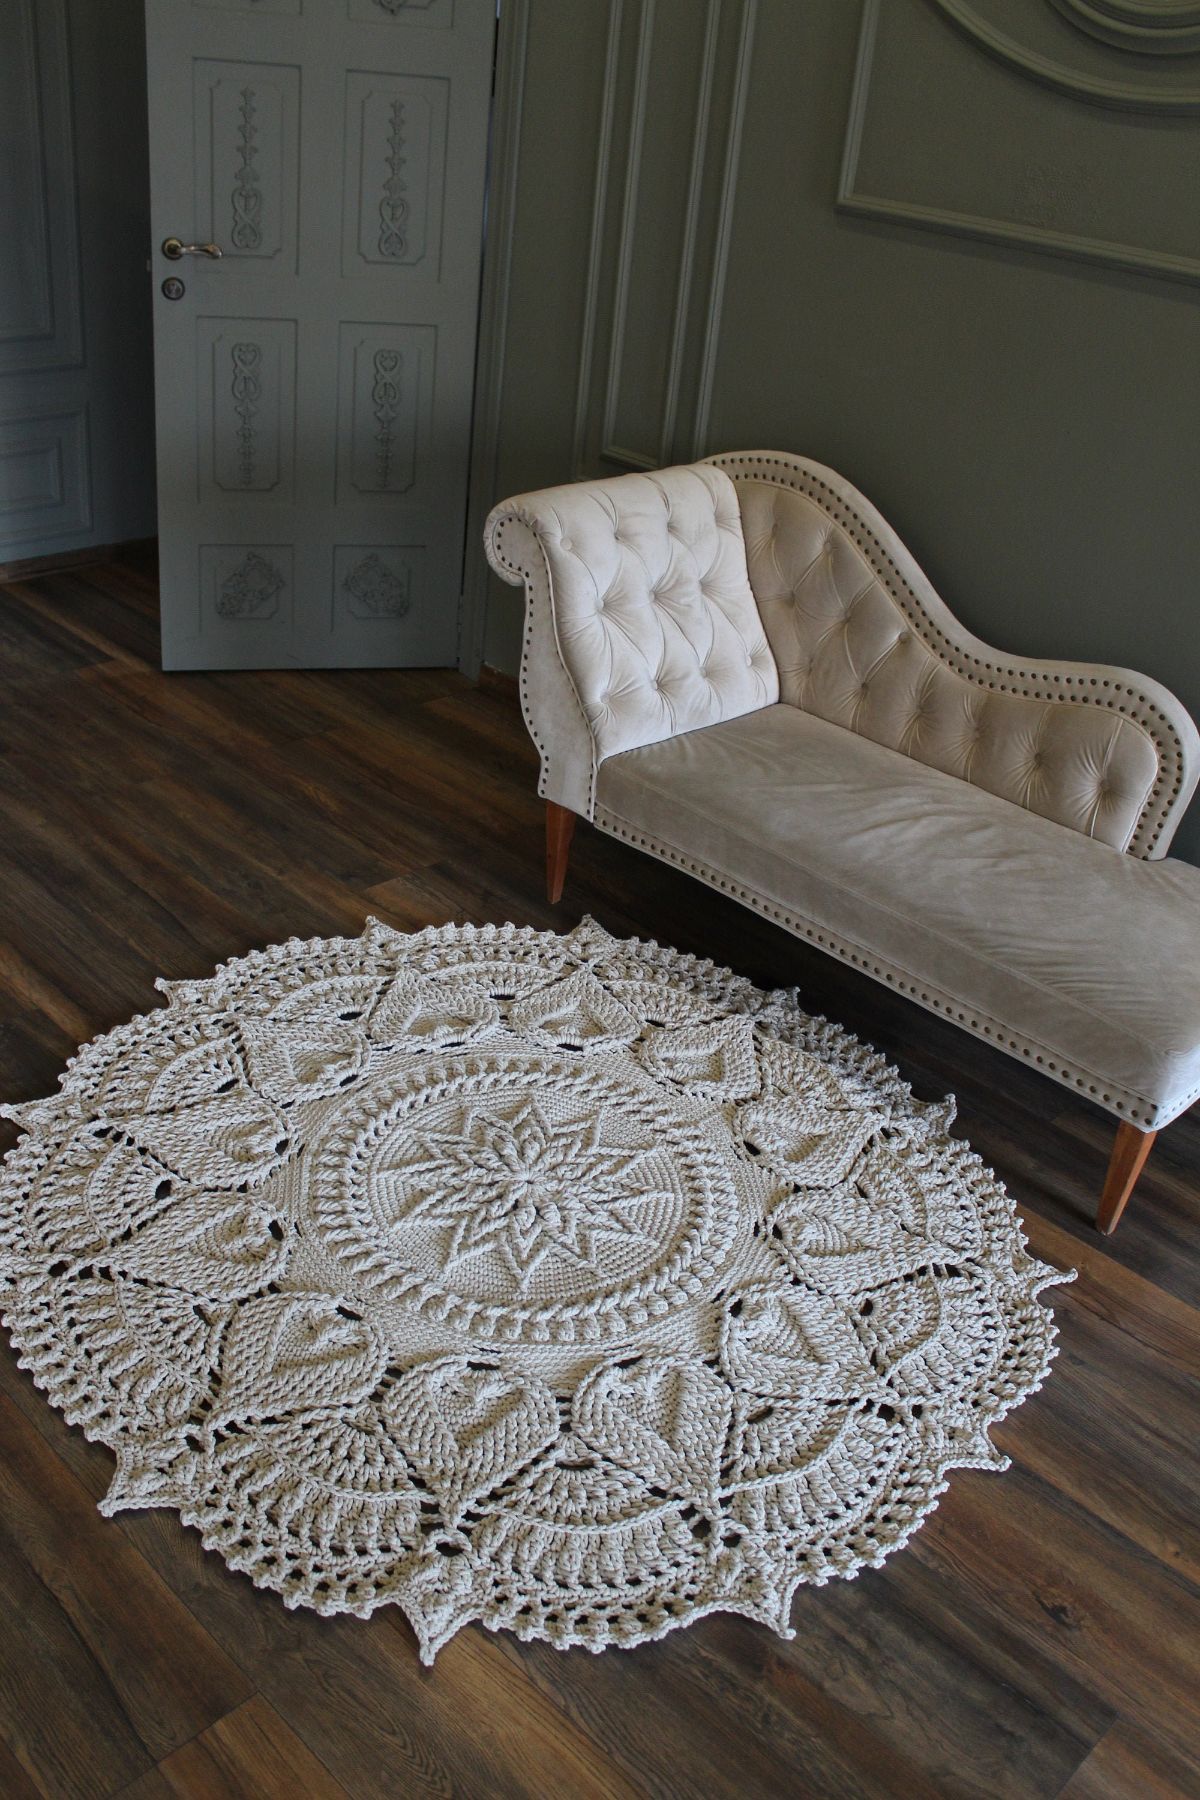 Large cream round rug with a doily outer edge and large petal-like pieces and a round center with a flower on wooden flooring next to a cream sofa.